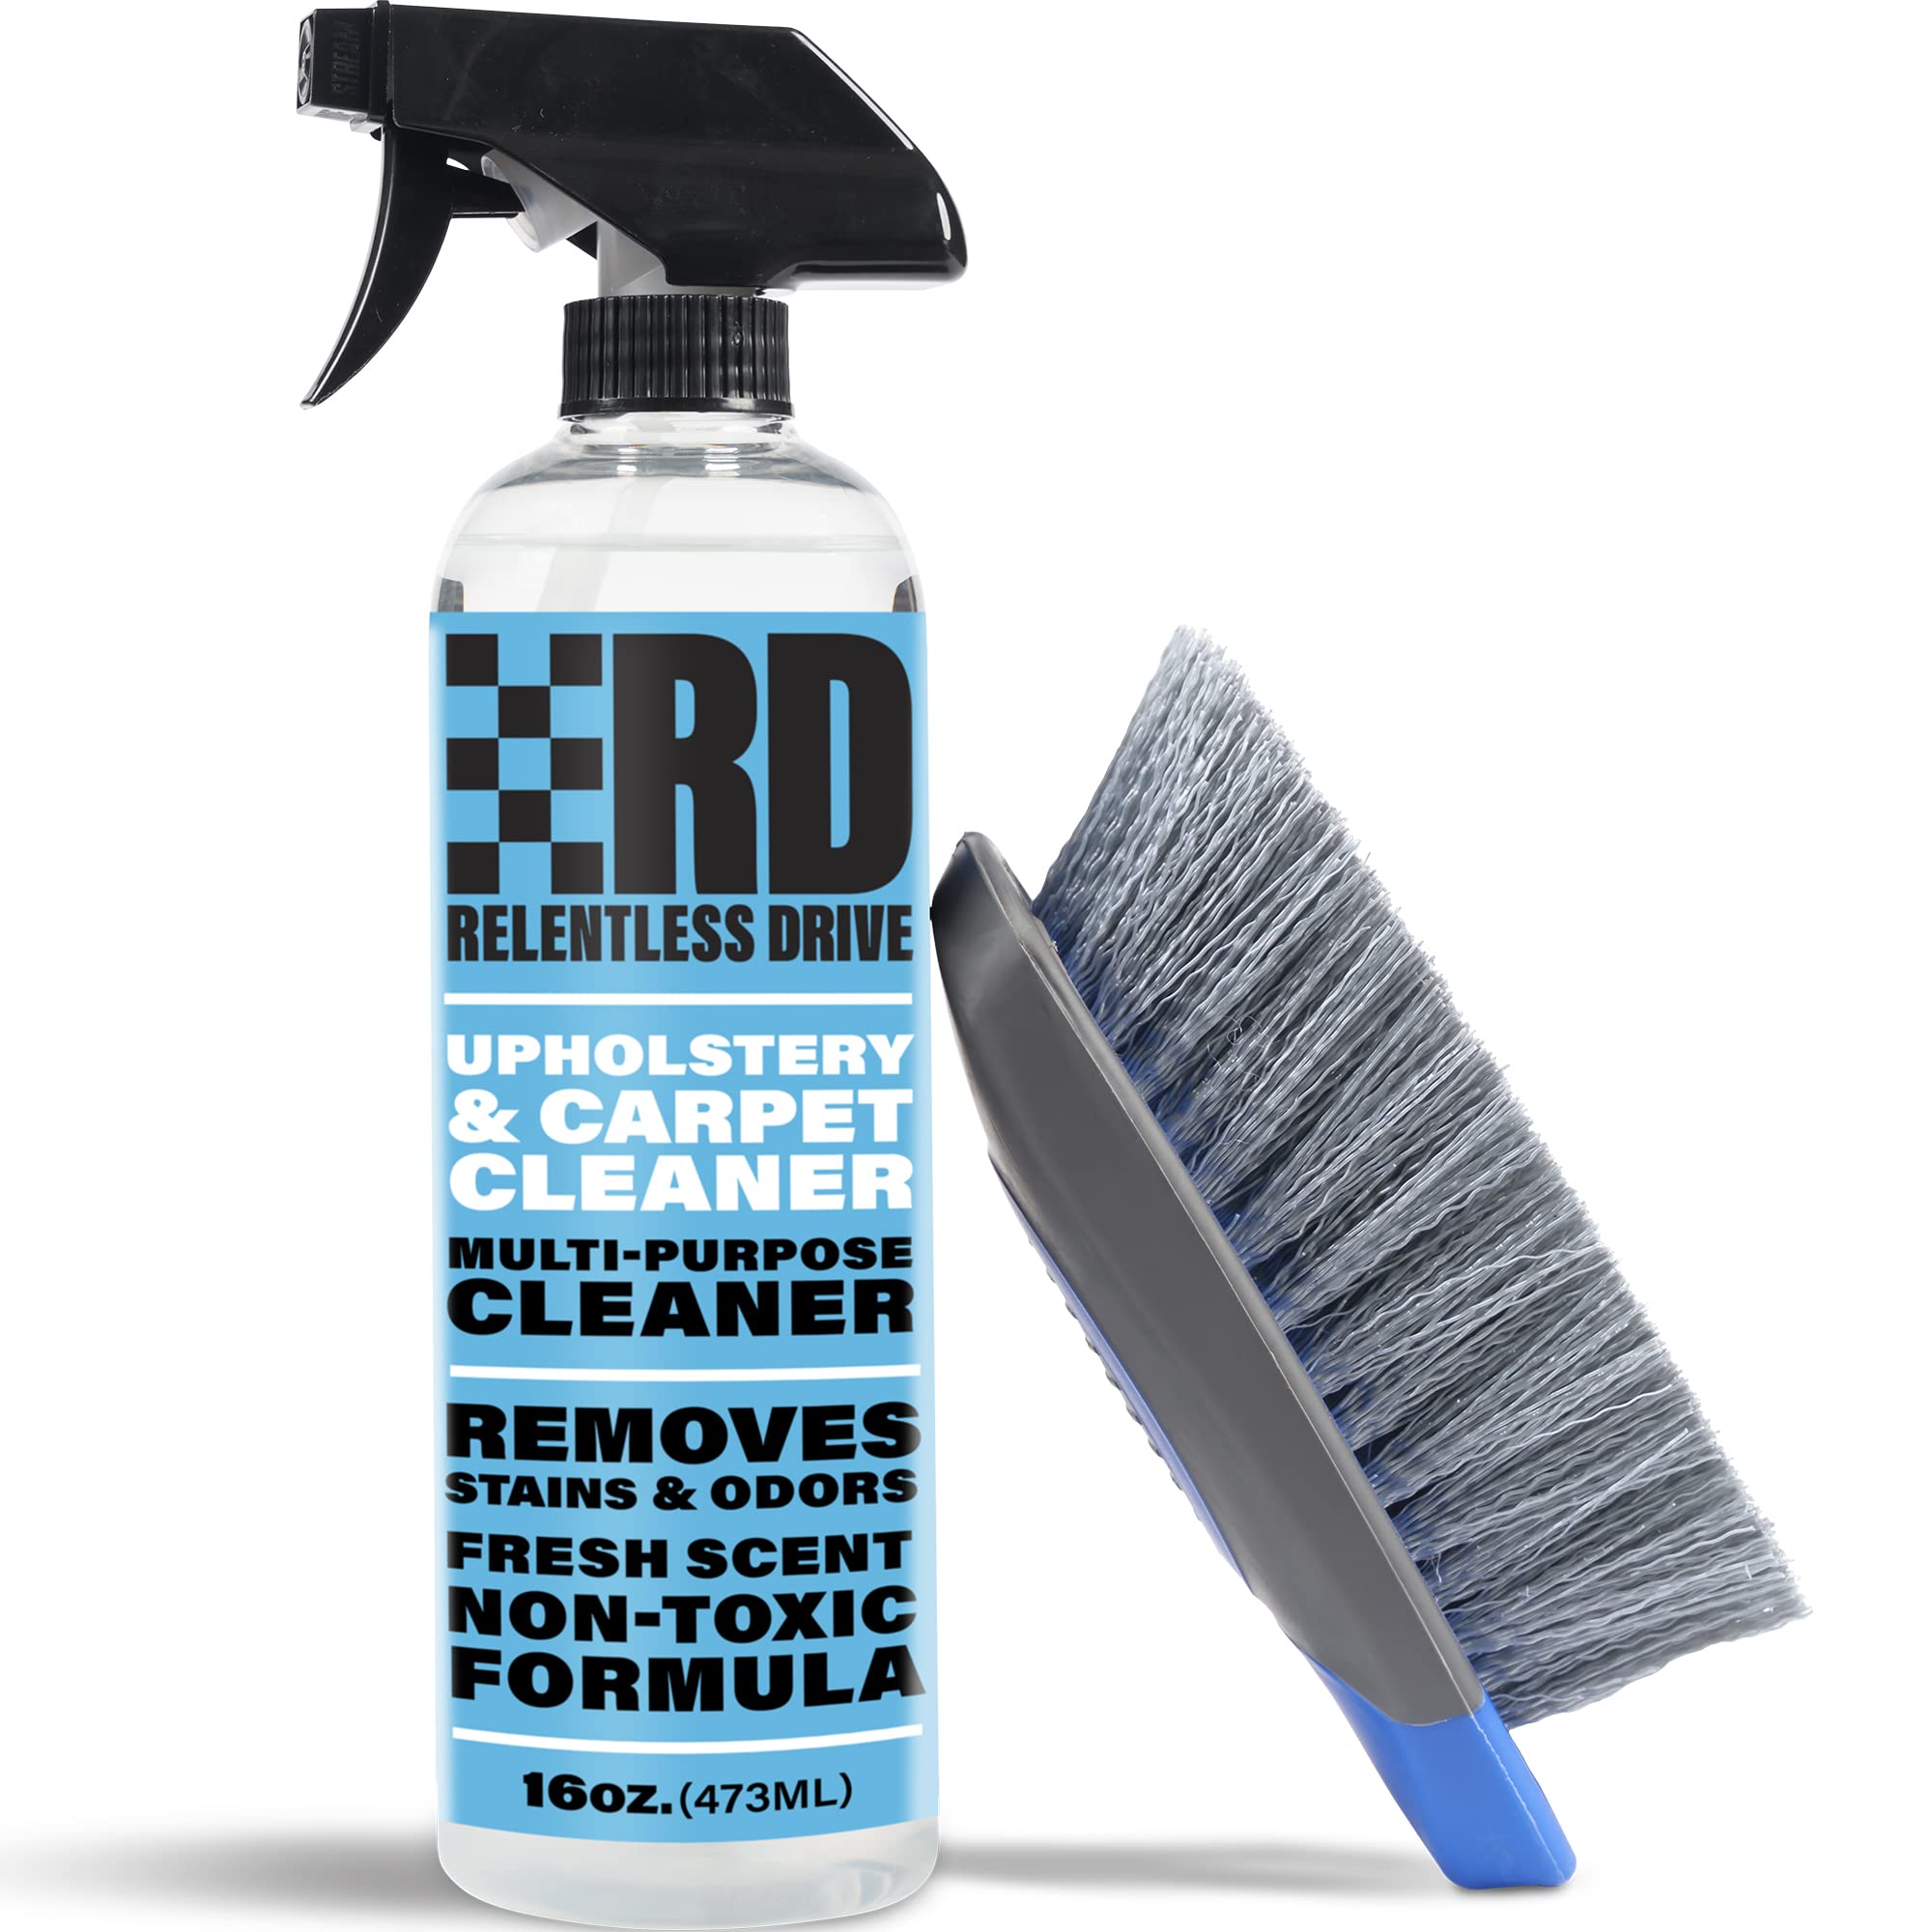 Relentless Drive car Upholstery cleaner Kit - car Seat cleaner & car carpet  cleaner - Works great on Stains, Keep car In